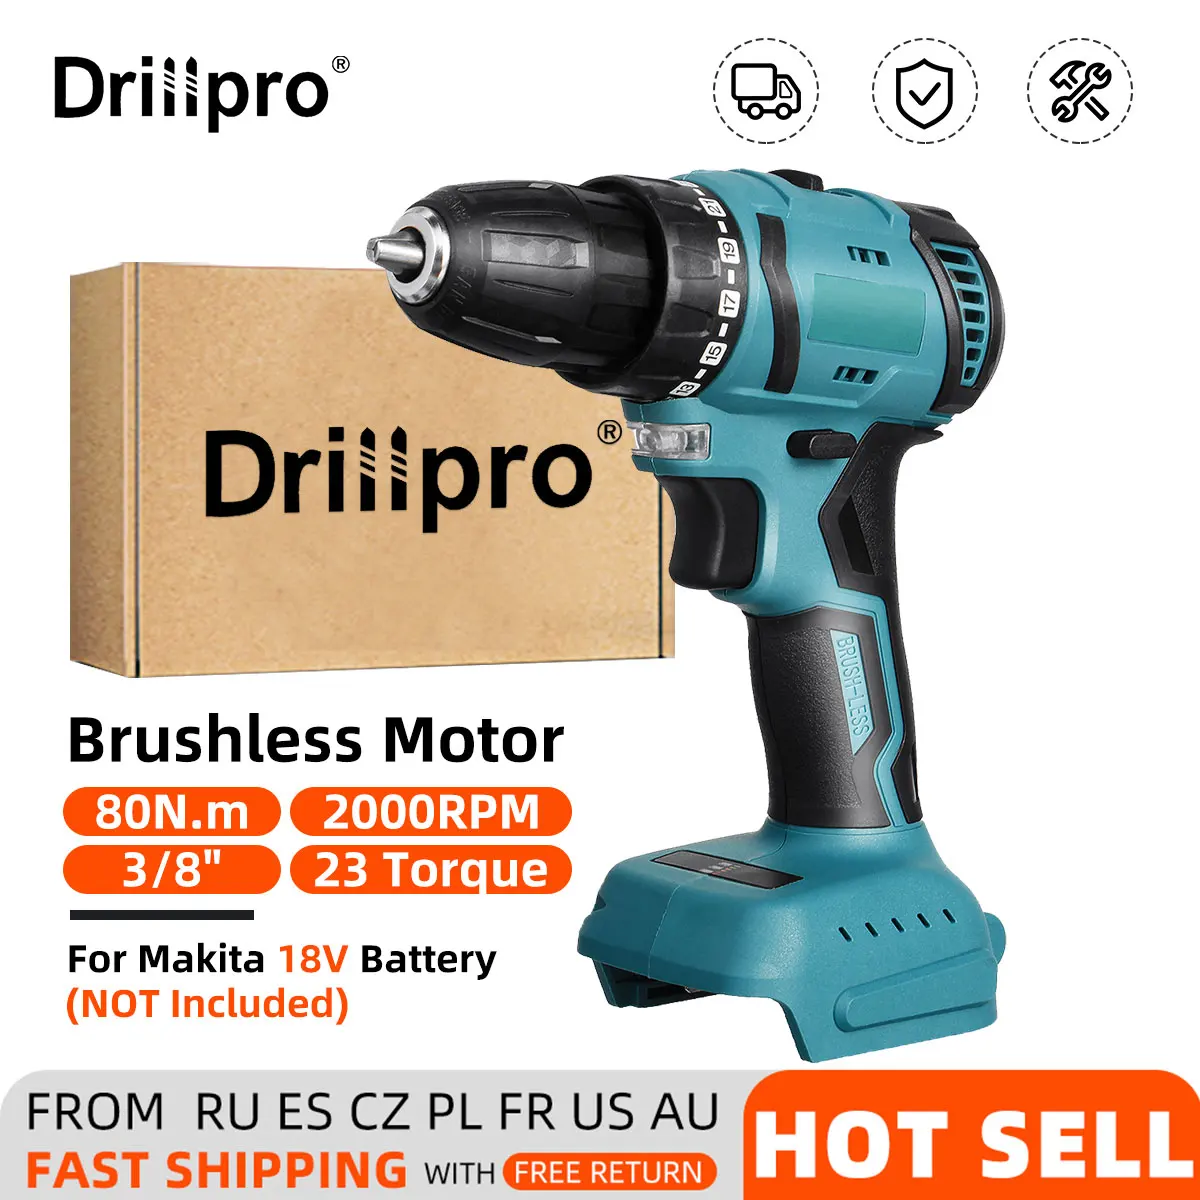 

Drillpro 80N.m Brushless Cordless Electric Drill Rechargable DIY Power Tool Hammer Drill Screwdriver Wrench for Makita Battery